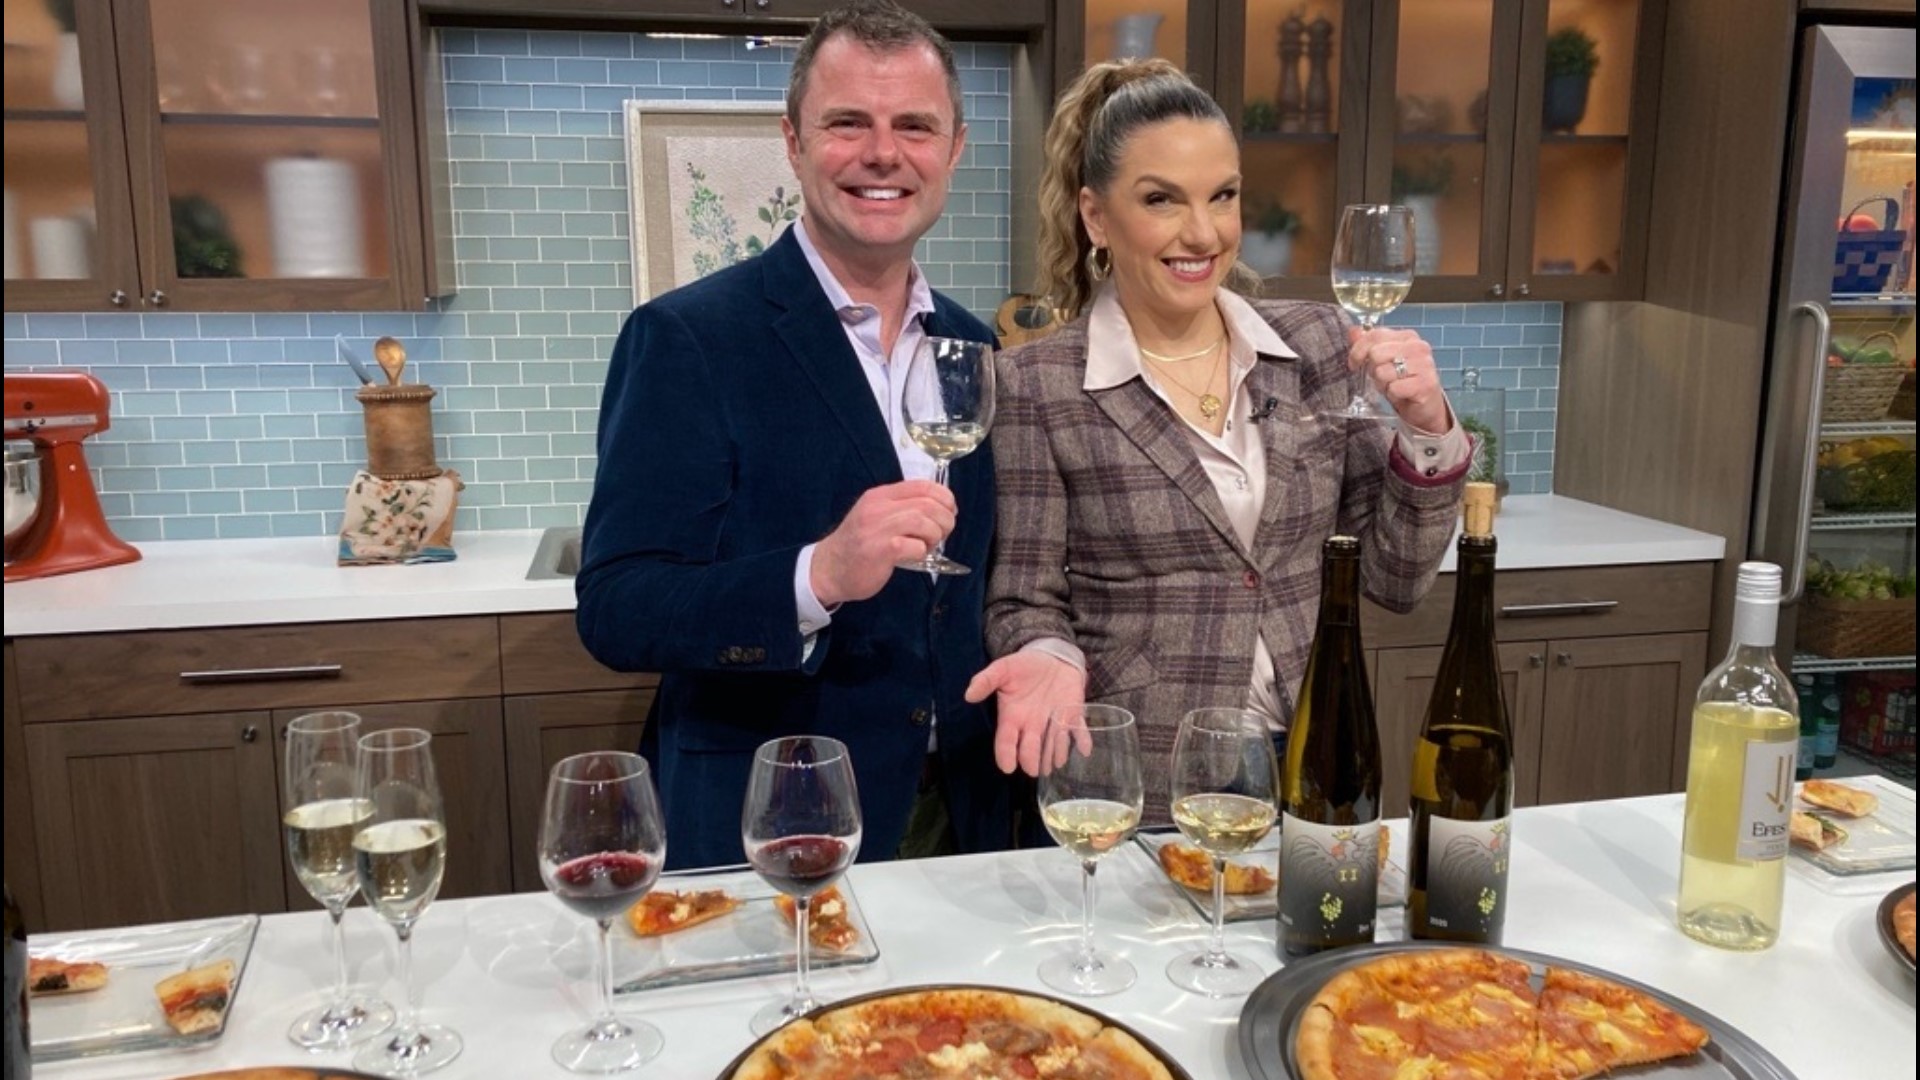 Master Sommelier Chris Tanghe chose four wines that pair well with your favorite pizza pies. #newdaynw